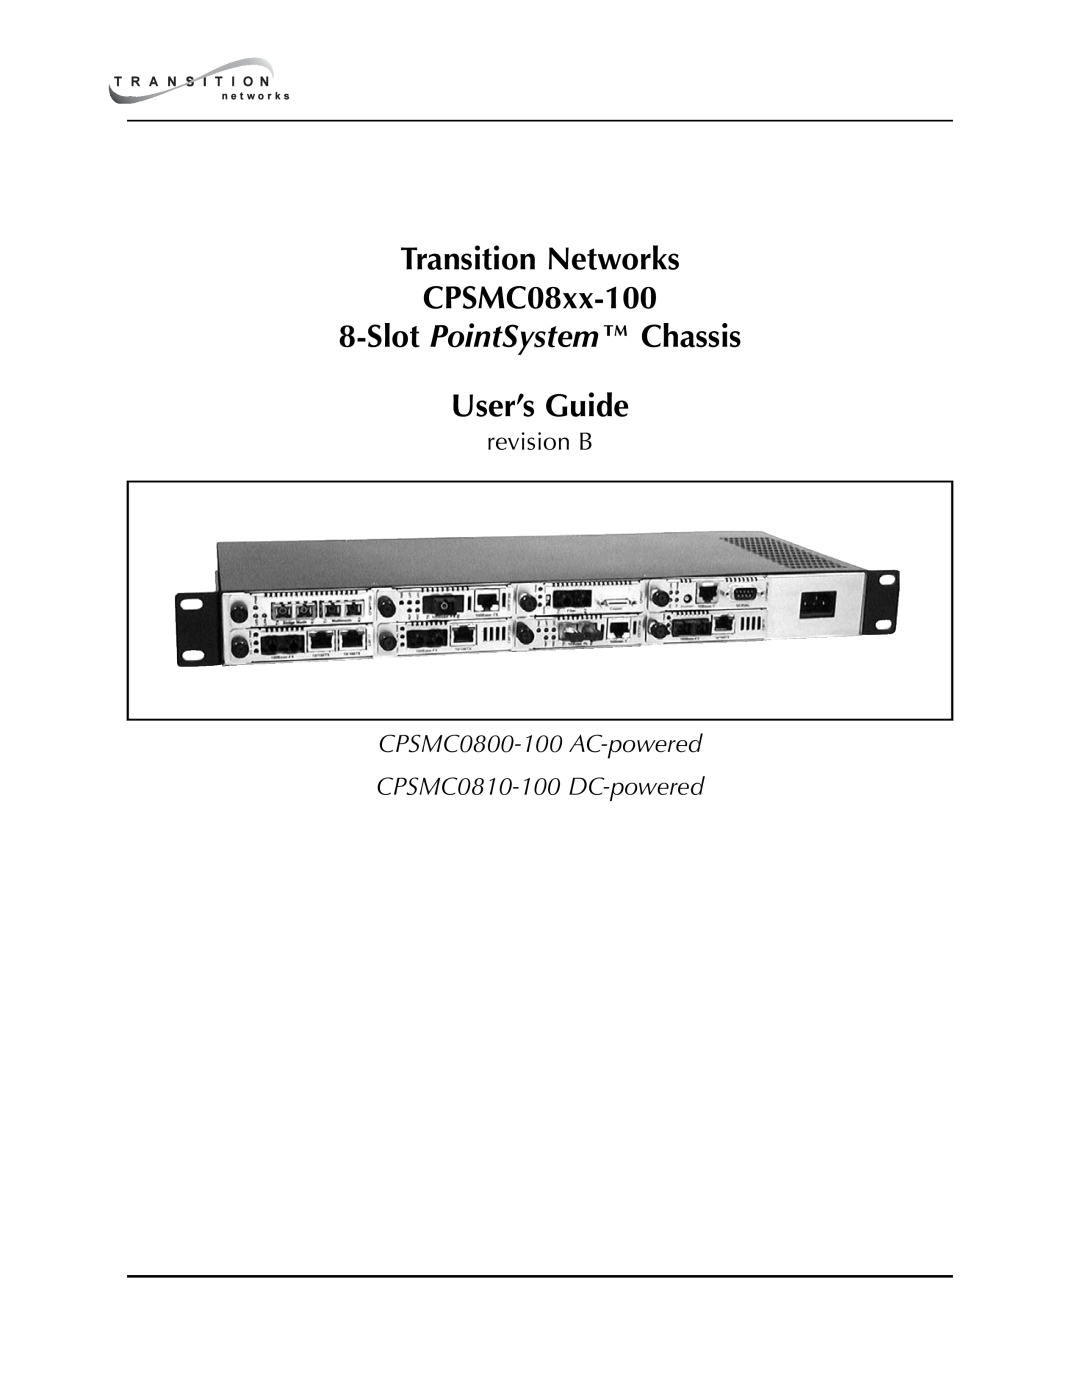 Transition Networks CPSMC0810-100 manual Transition Networks CPSMC08xx-100 8-Slot PointSystem Chassis, User’s Guide 